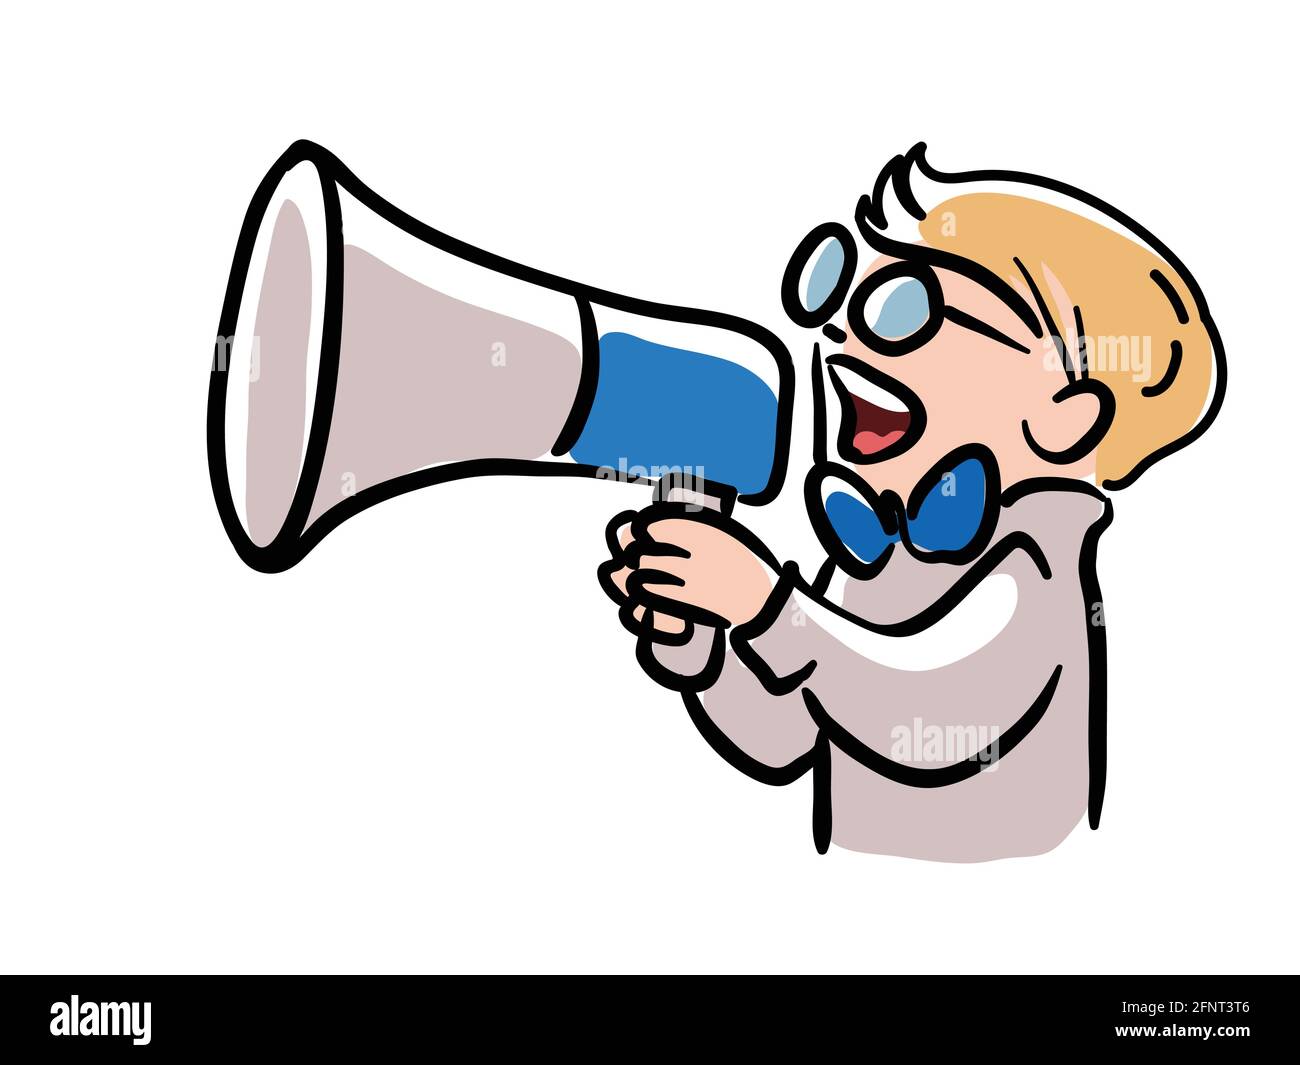 Announcer with megaphone speaking loudly vector illustration Stock Vector